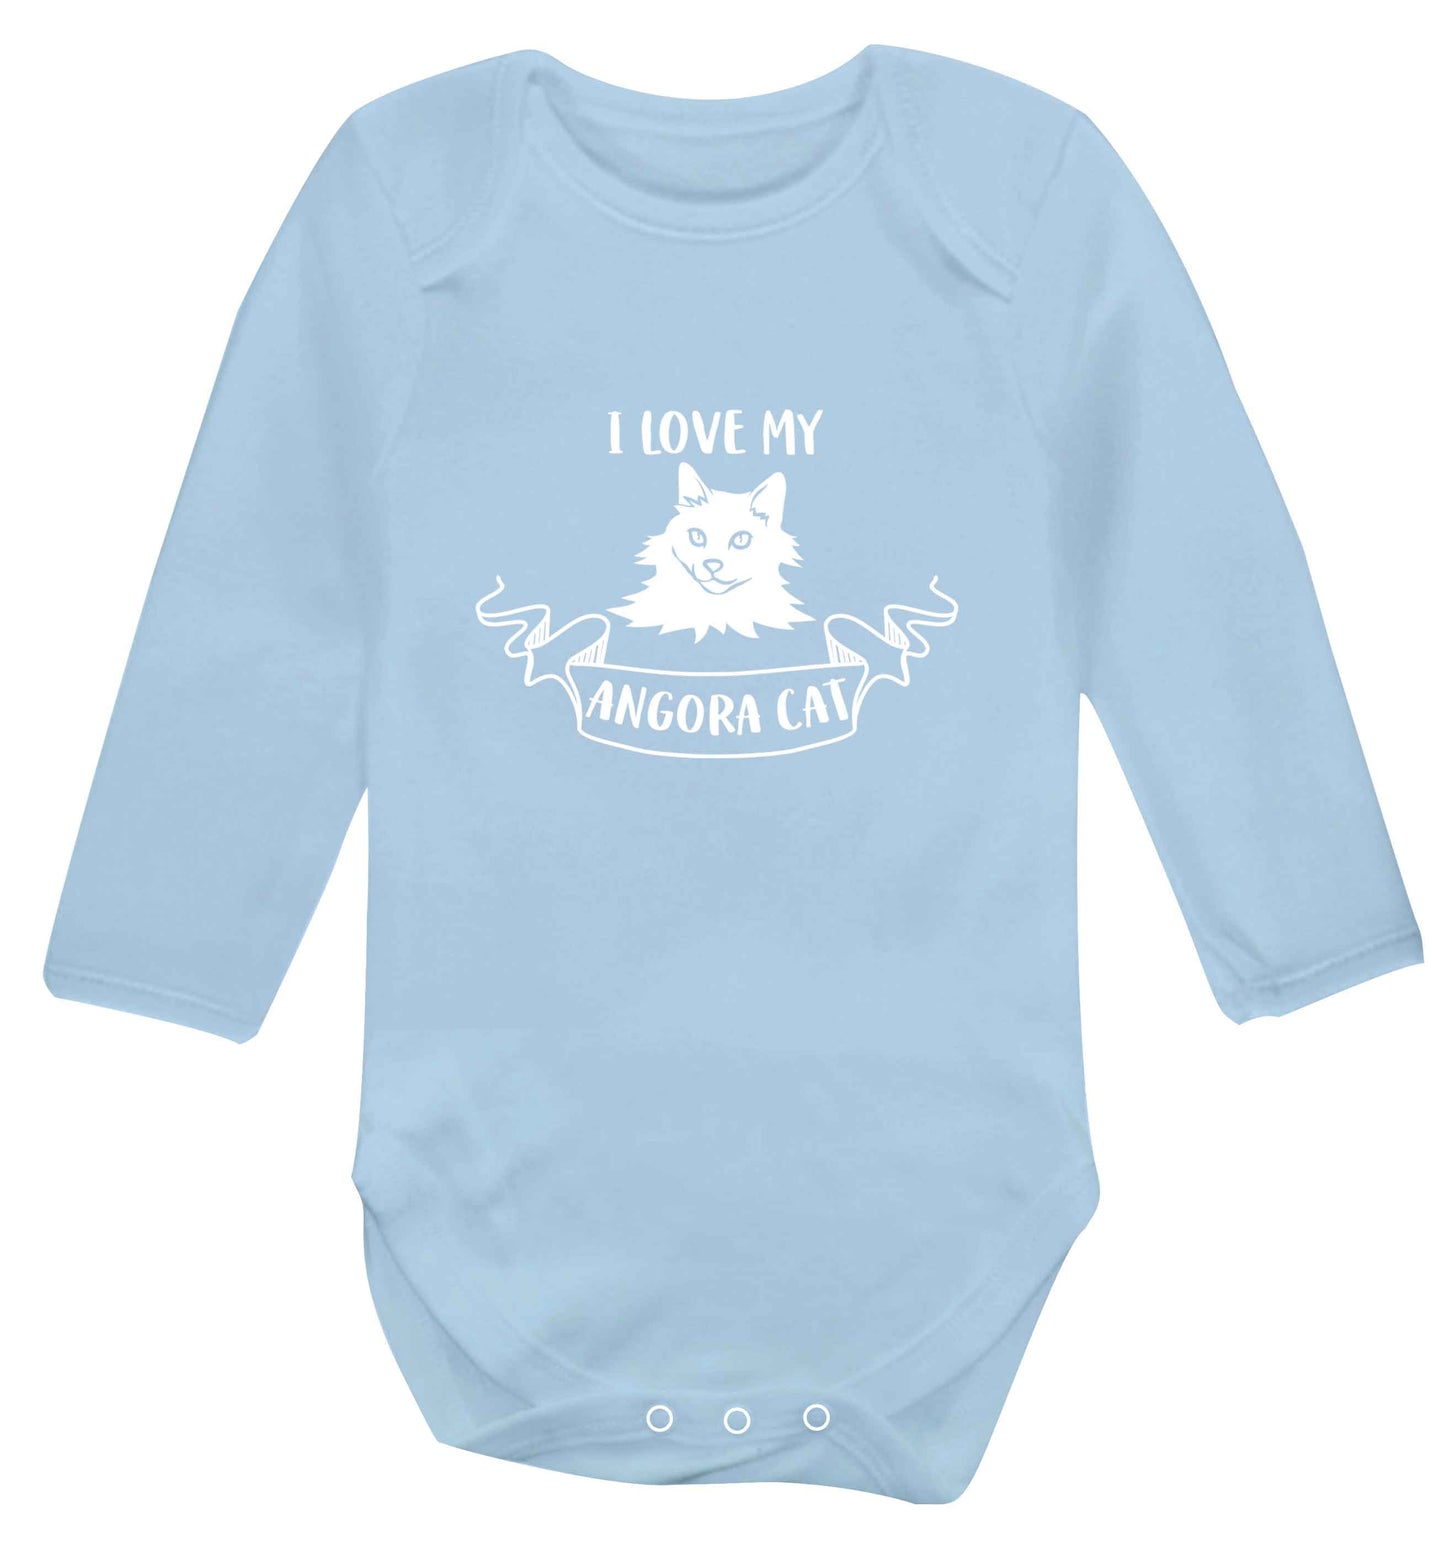 I love my angora cat baby vest long sleeved pale blue 6-12 months